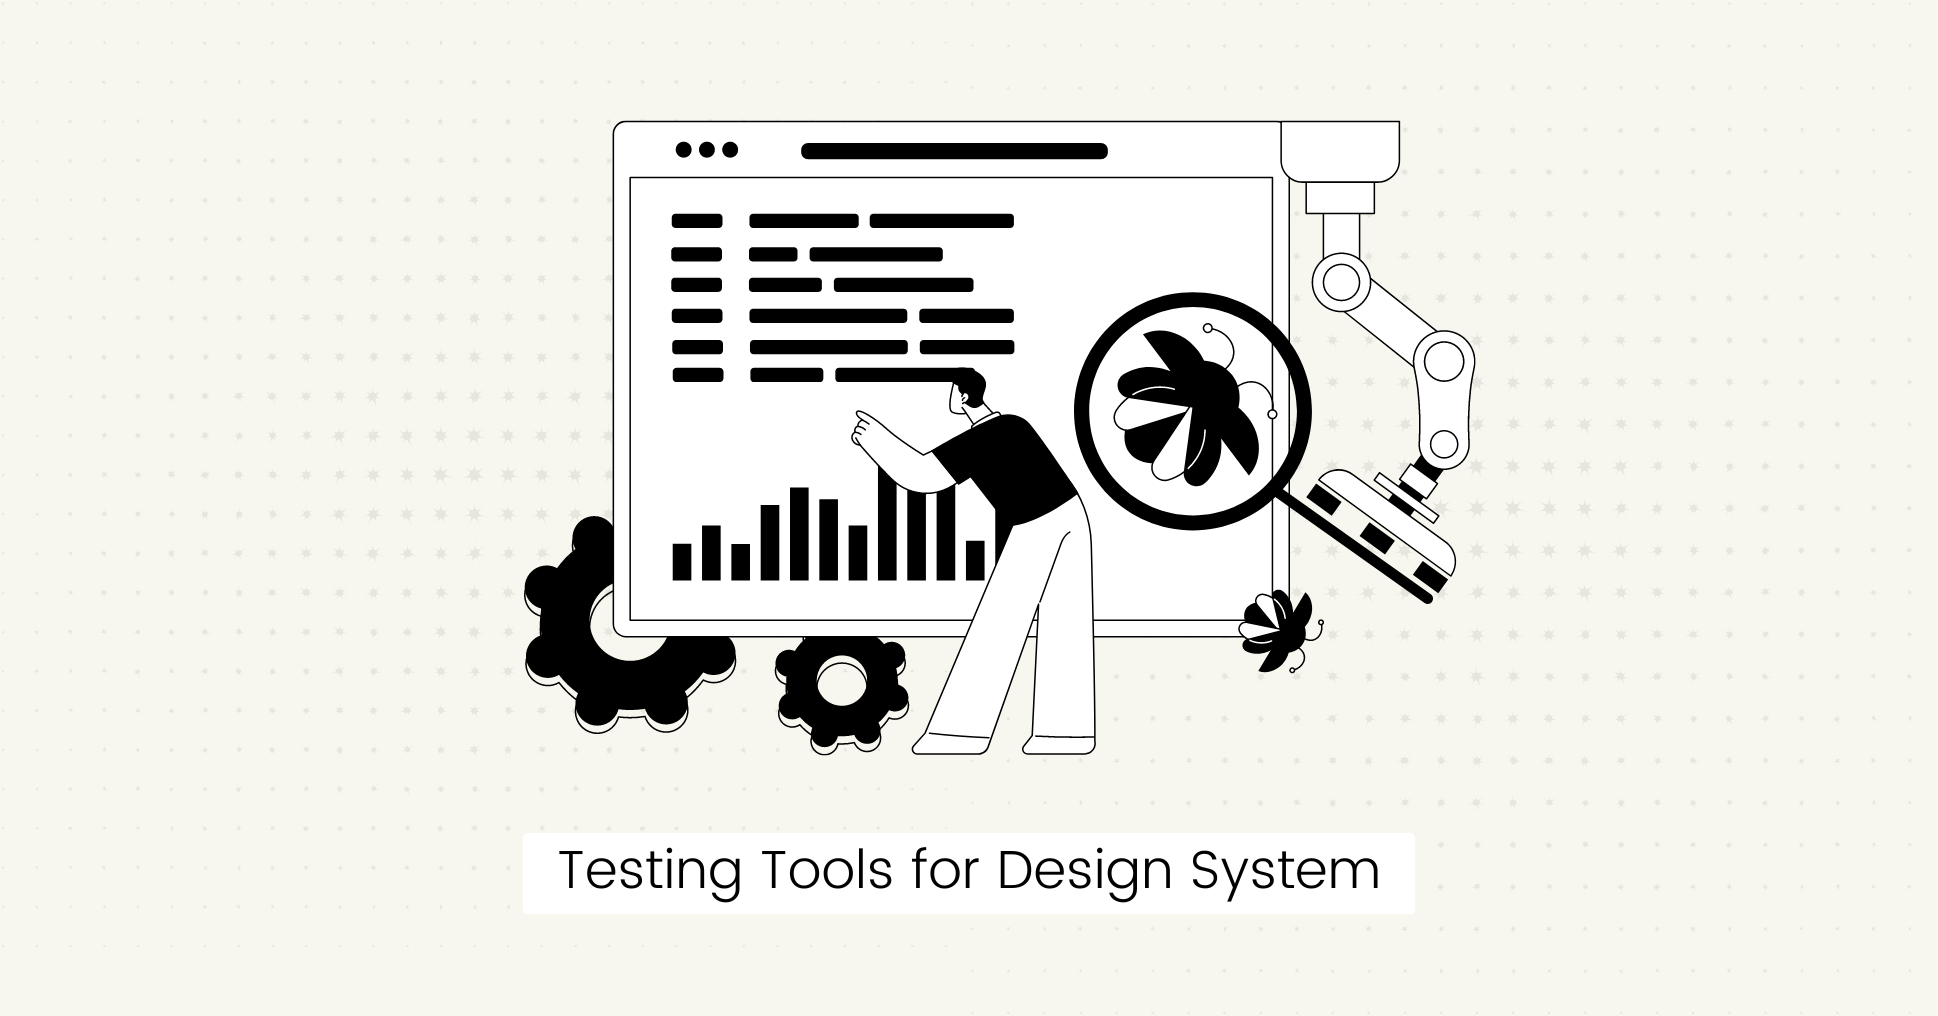 Testing Tools for Design System